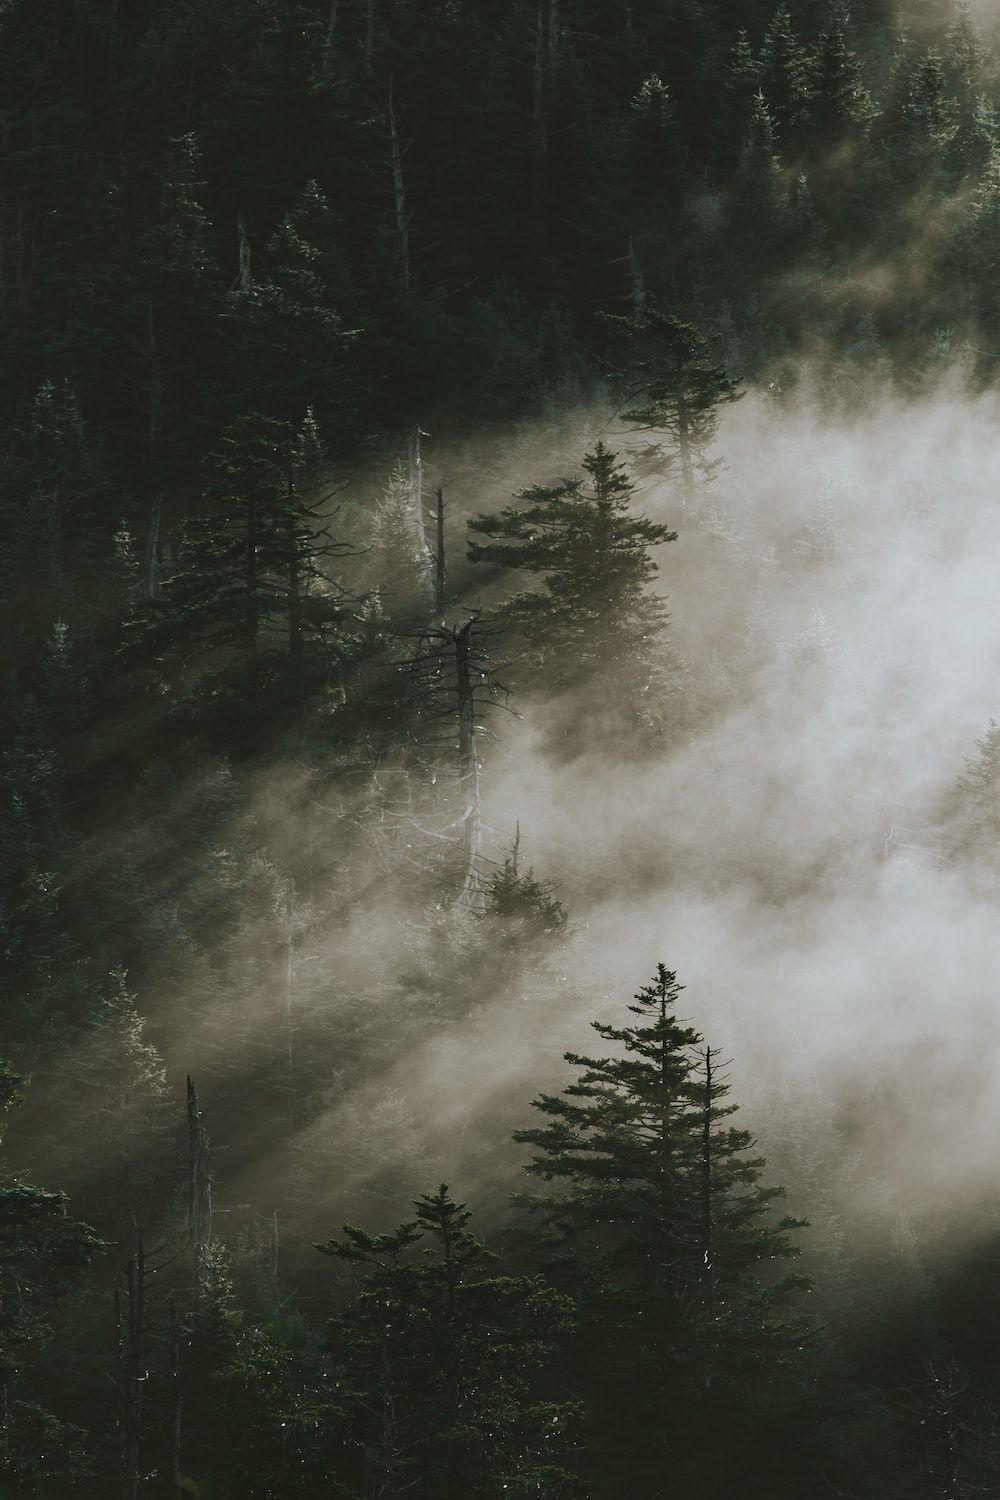 A plane flying over the top of some trees - Foggy forest